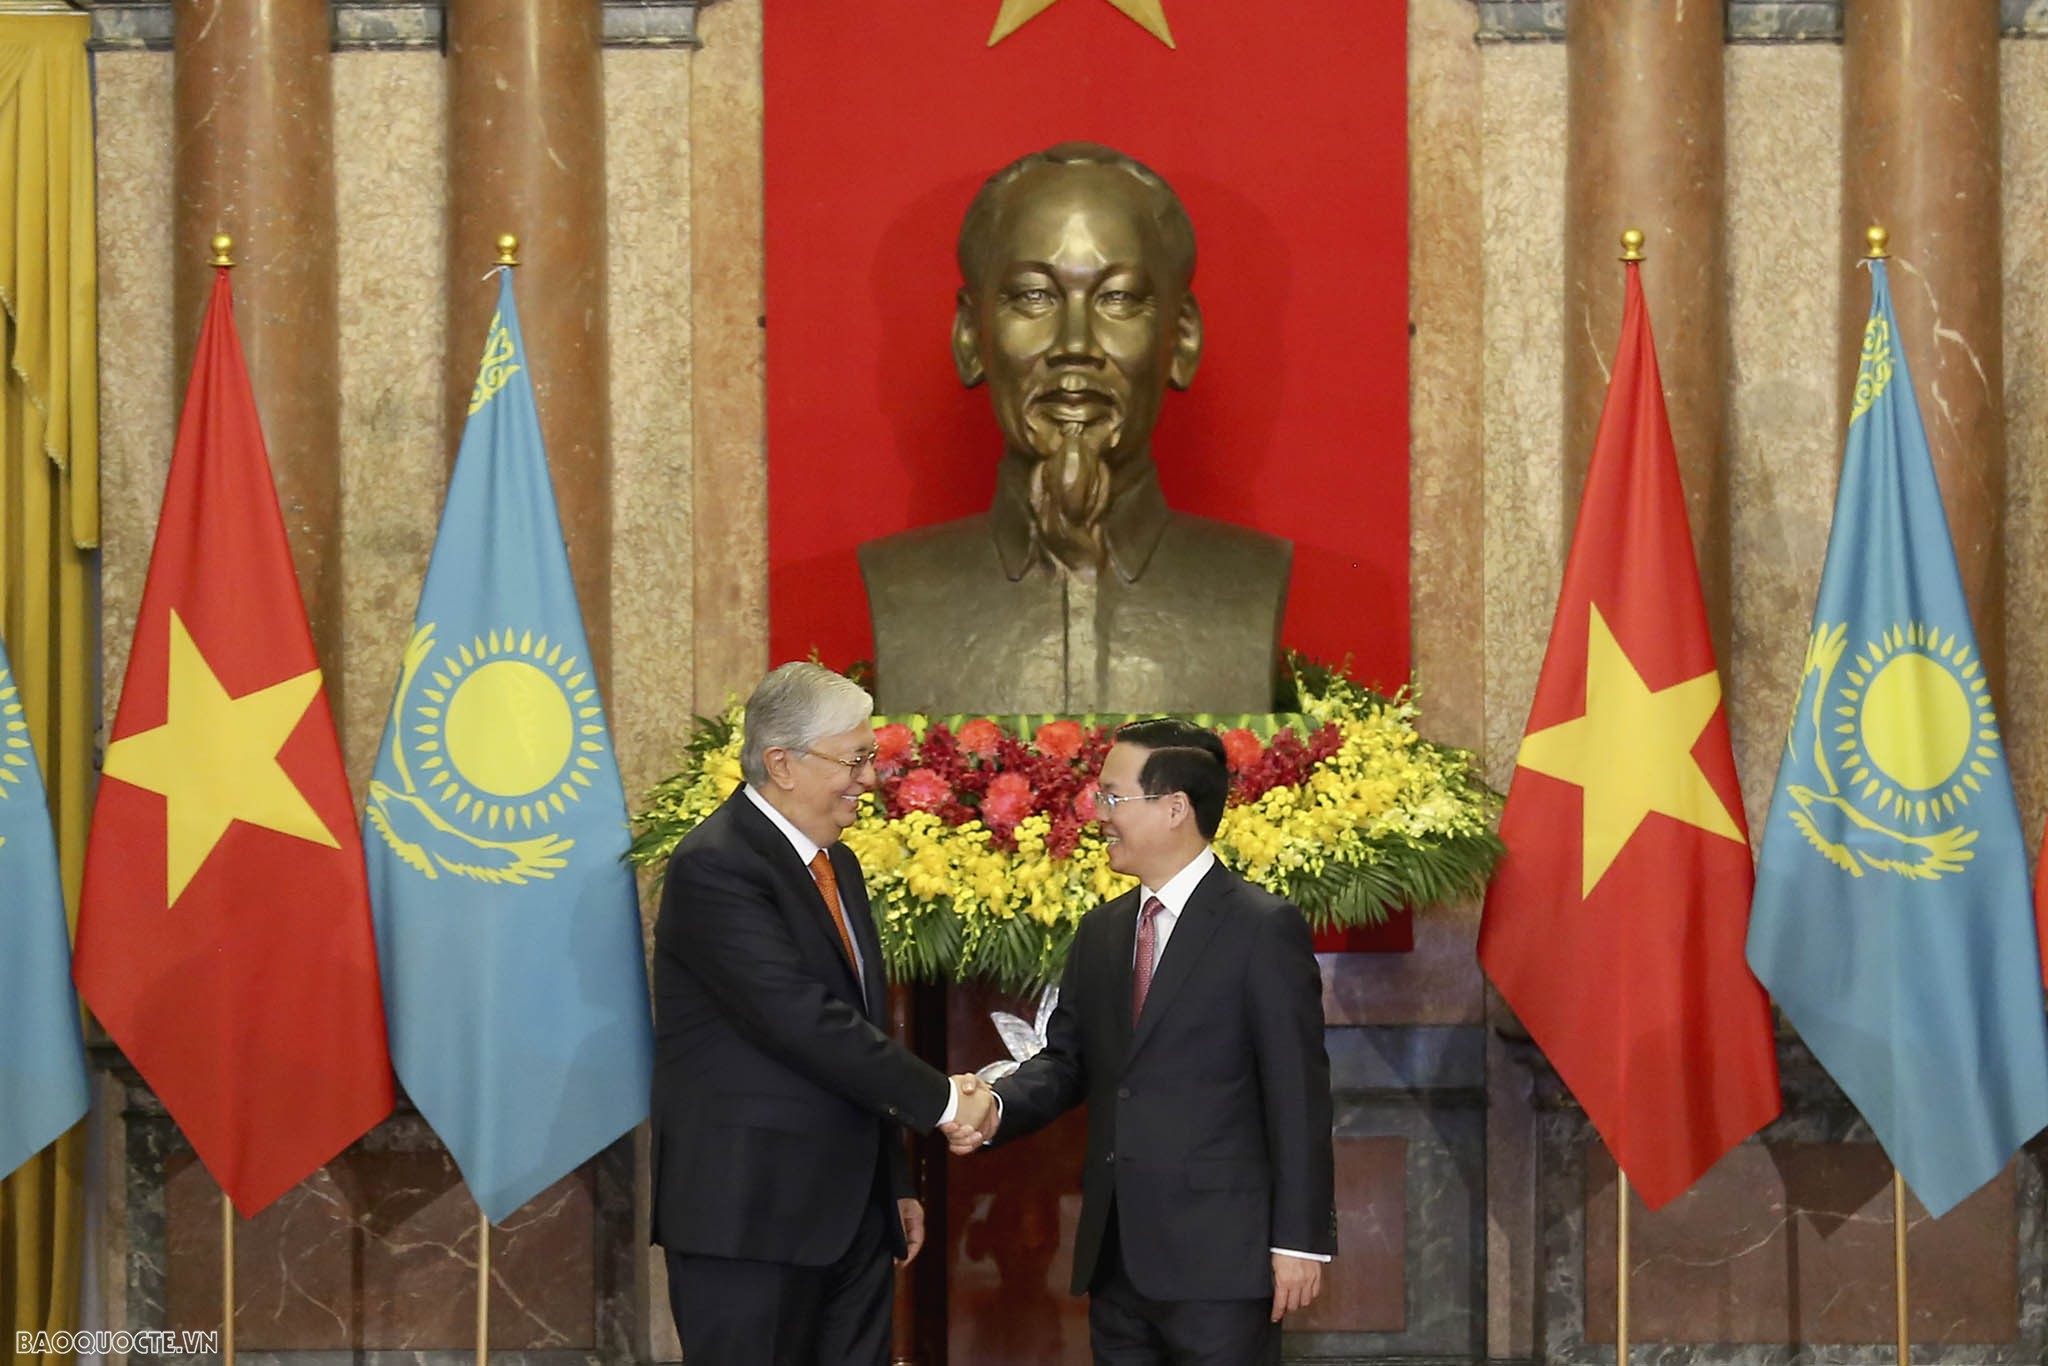 Joint press release on outcomes of Kazakh President’s Vietnam visit